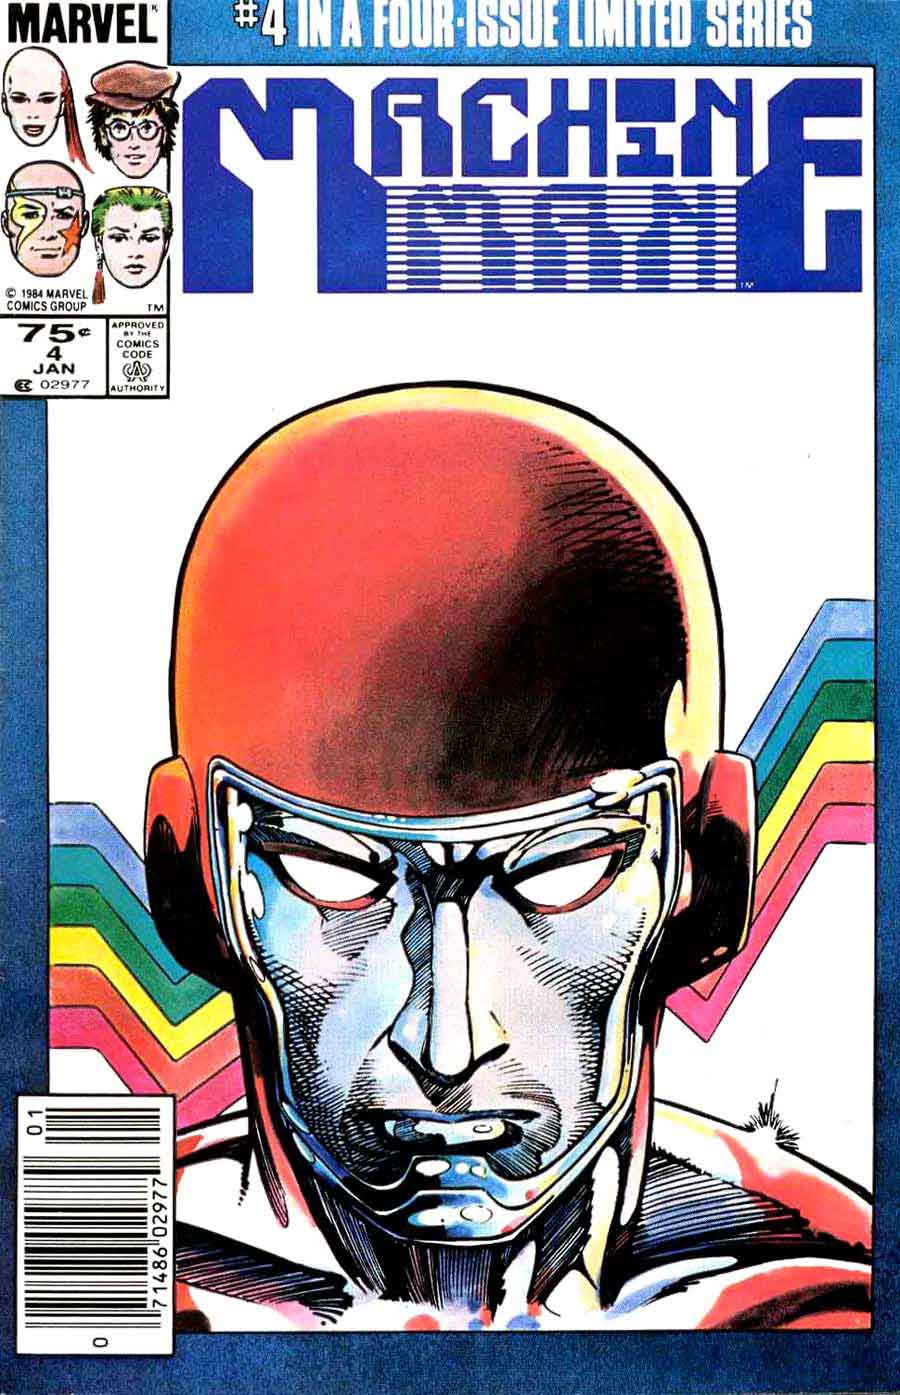 Machine Man v2 #4 marvel 1980s comic book cover art by Barry Windsor Smith